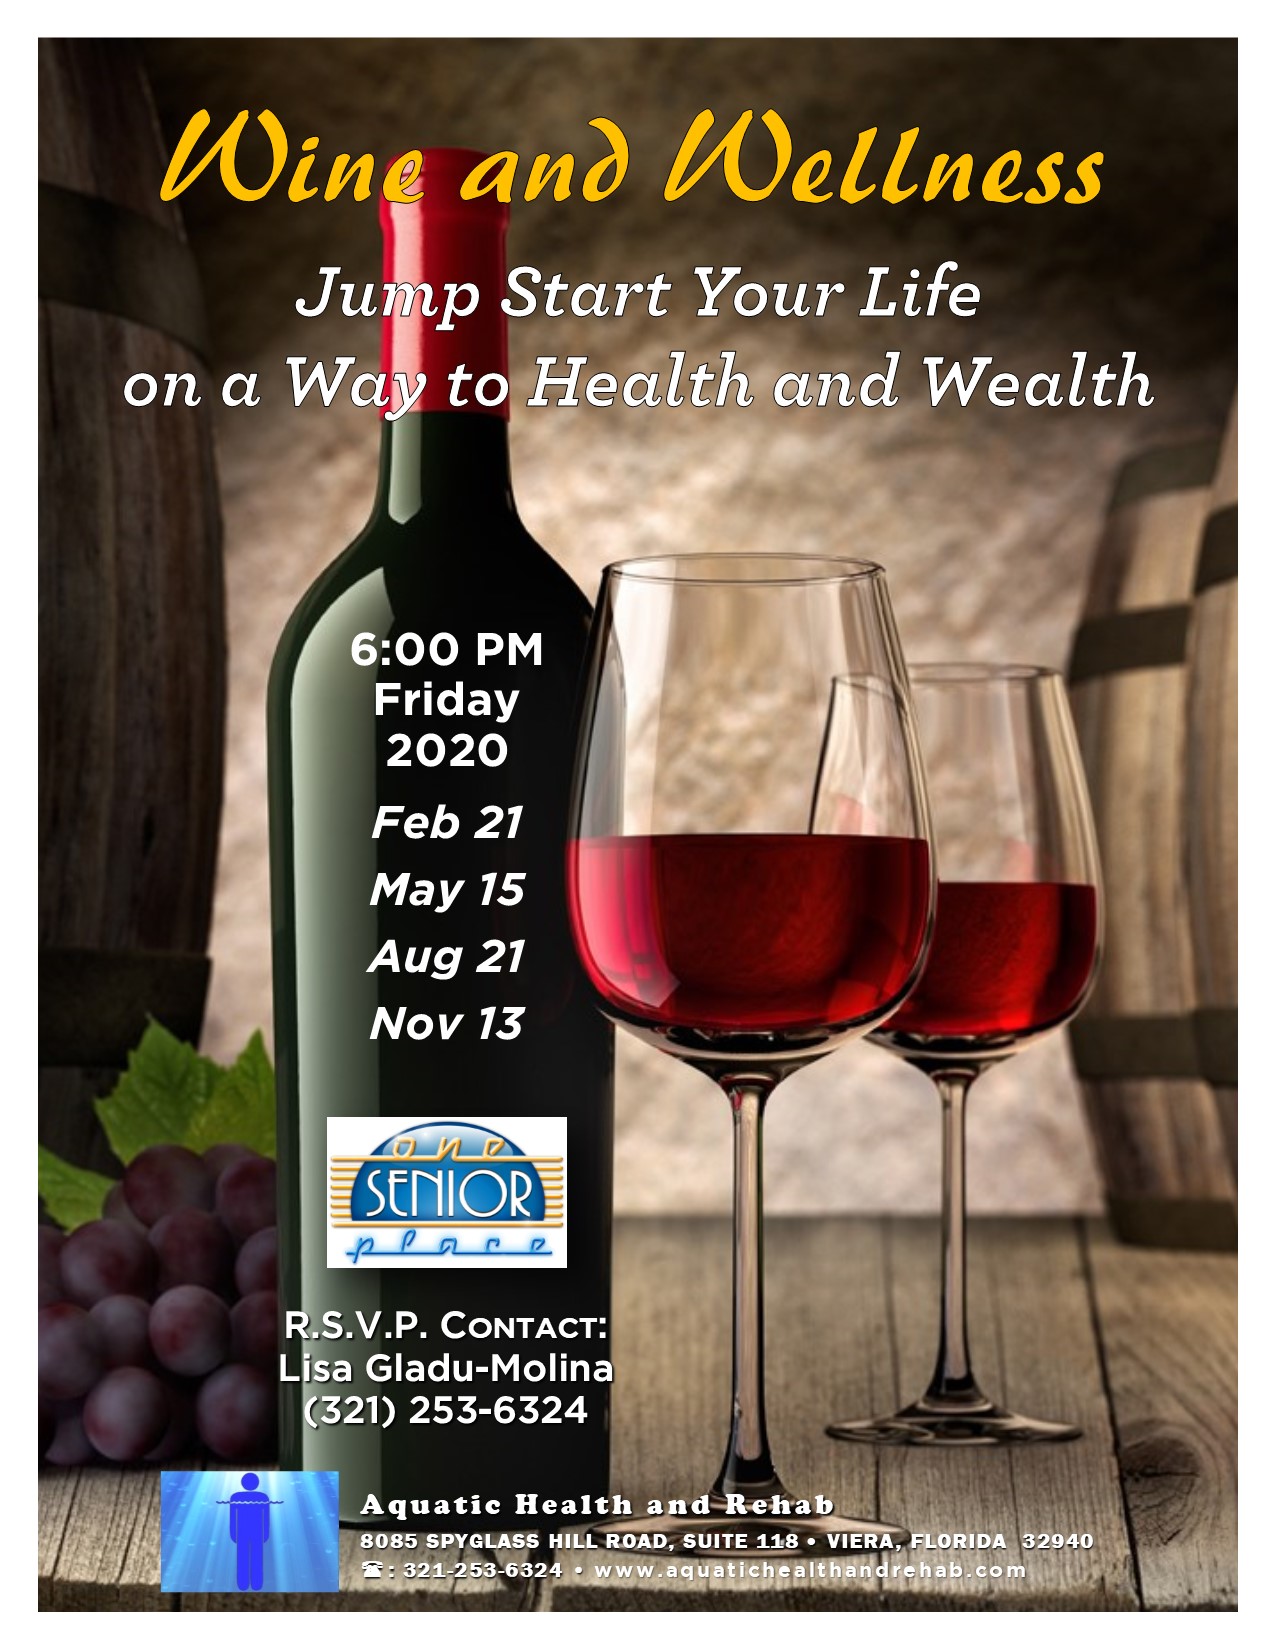 Wine and Wellness, presented by Aquatic Health and Rehab